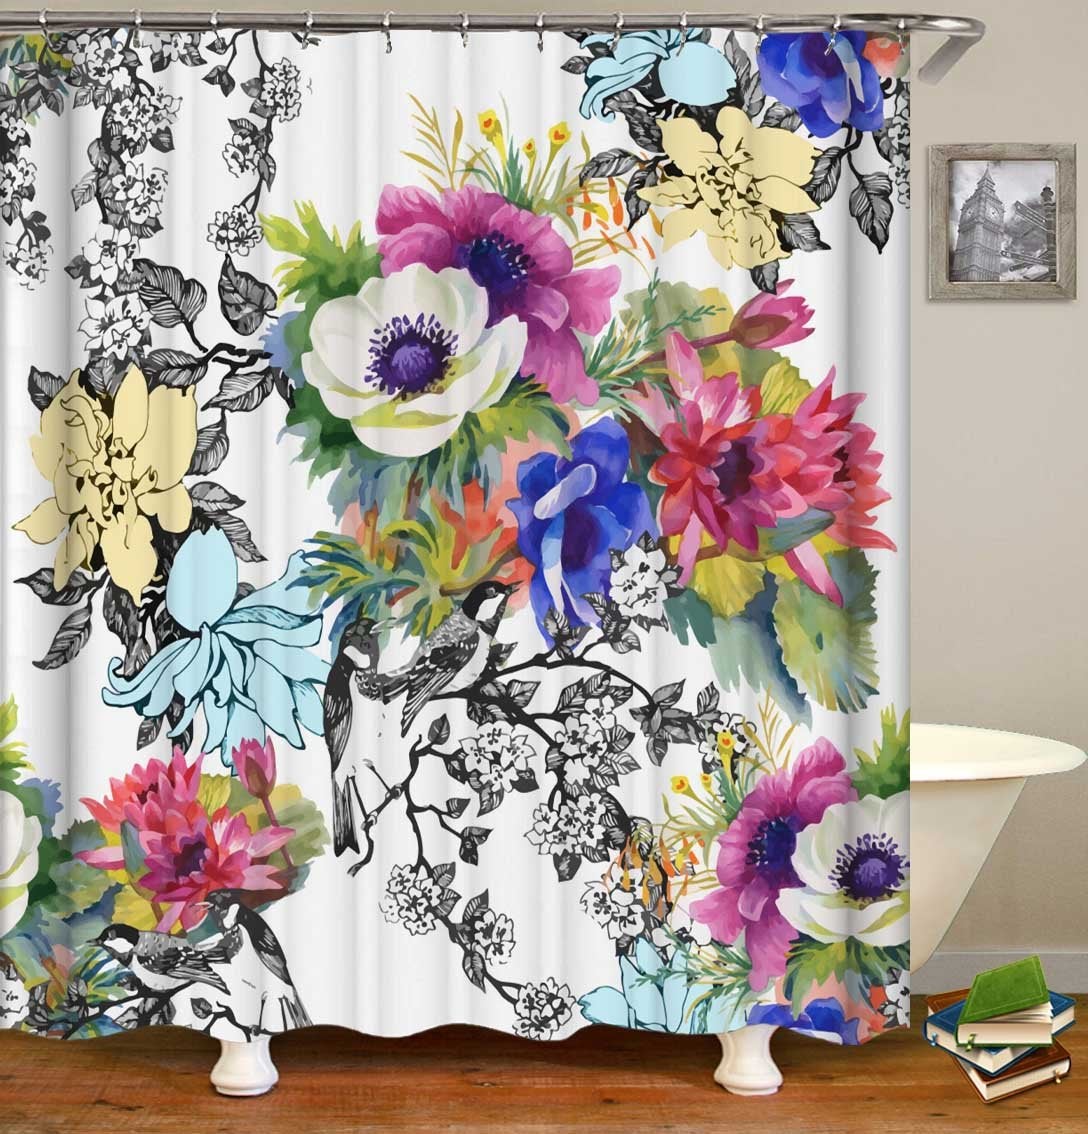 Black and White Colorful Floral Shower Curtain